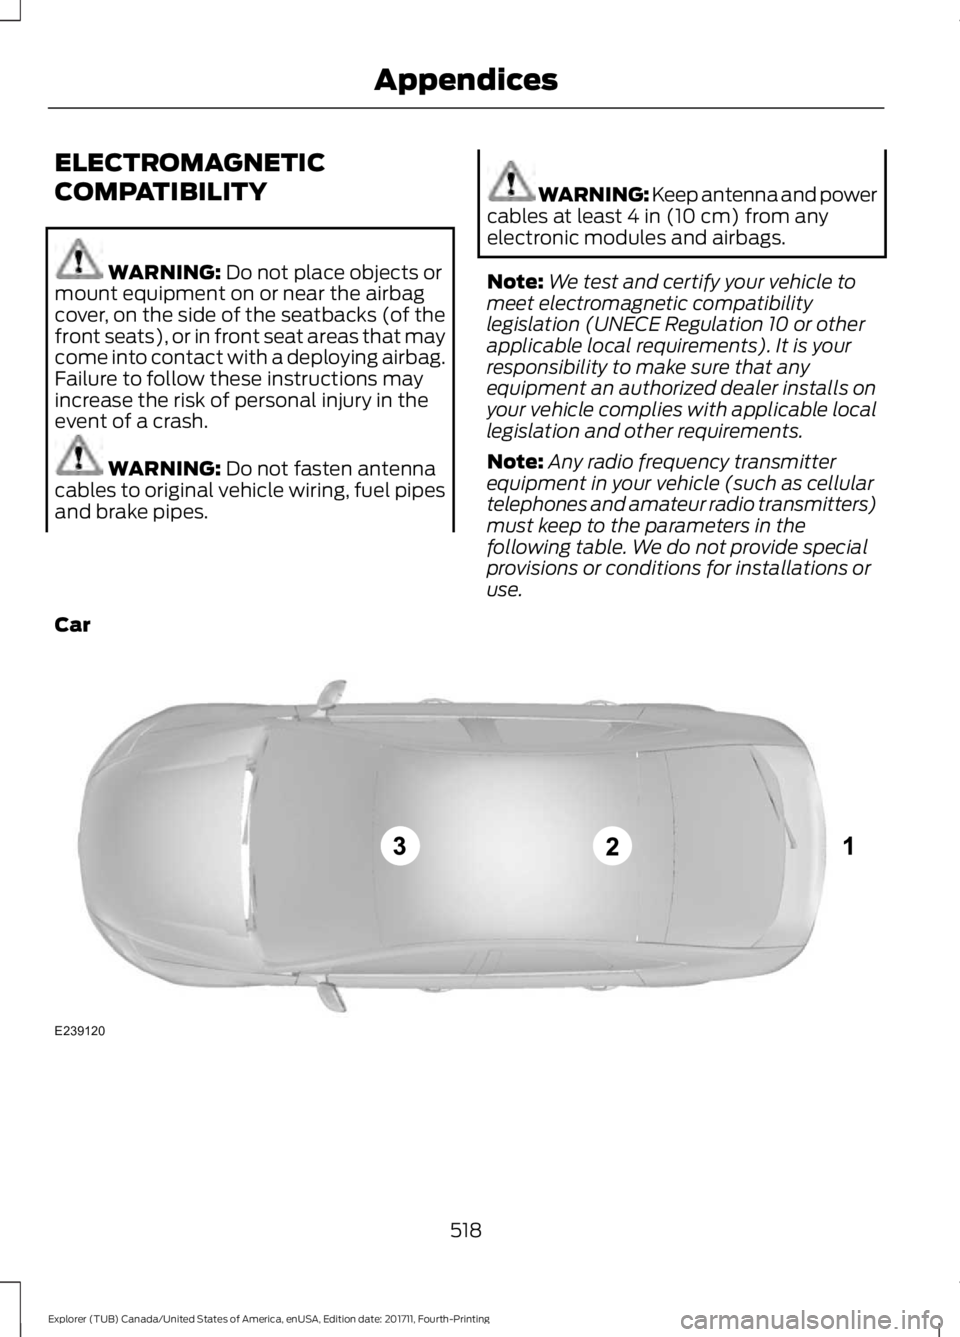 FORD EXPLORER 2018 Service Manual ELECTROMAGNETIC
COMPATIBILITY
WARNING: Do not place objects or
mount equipment on or near the airbag
cover, on the side of the seatbacks (of the
front seats), or in front seat areas that may
come into